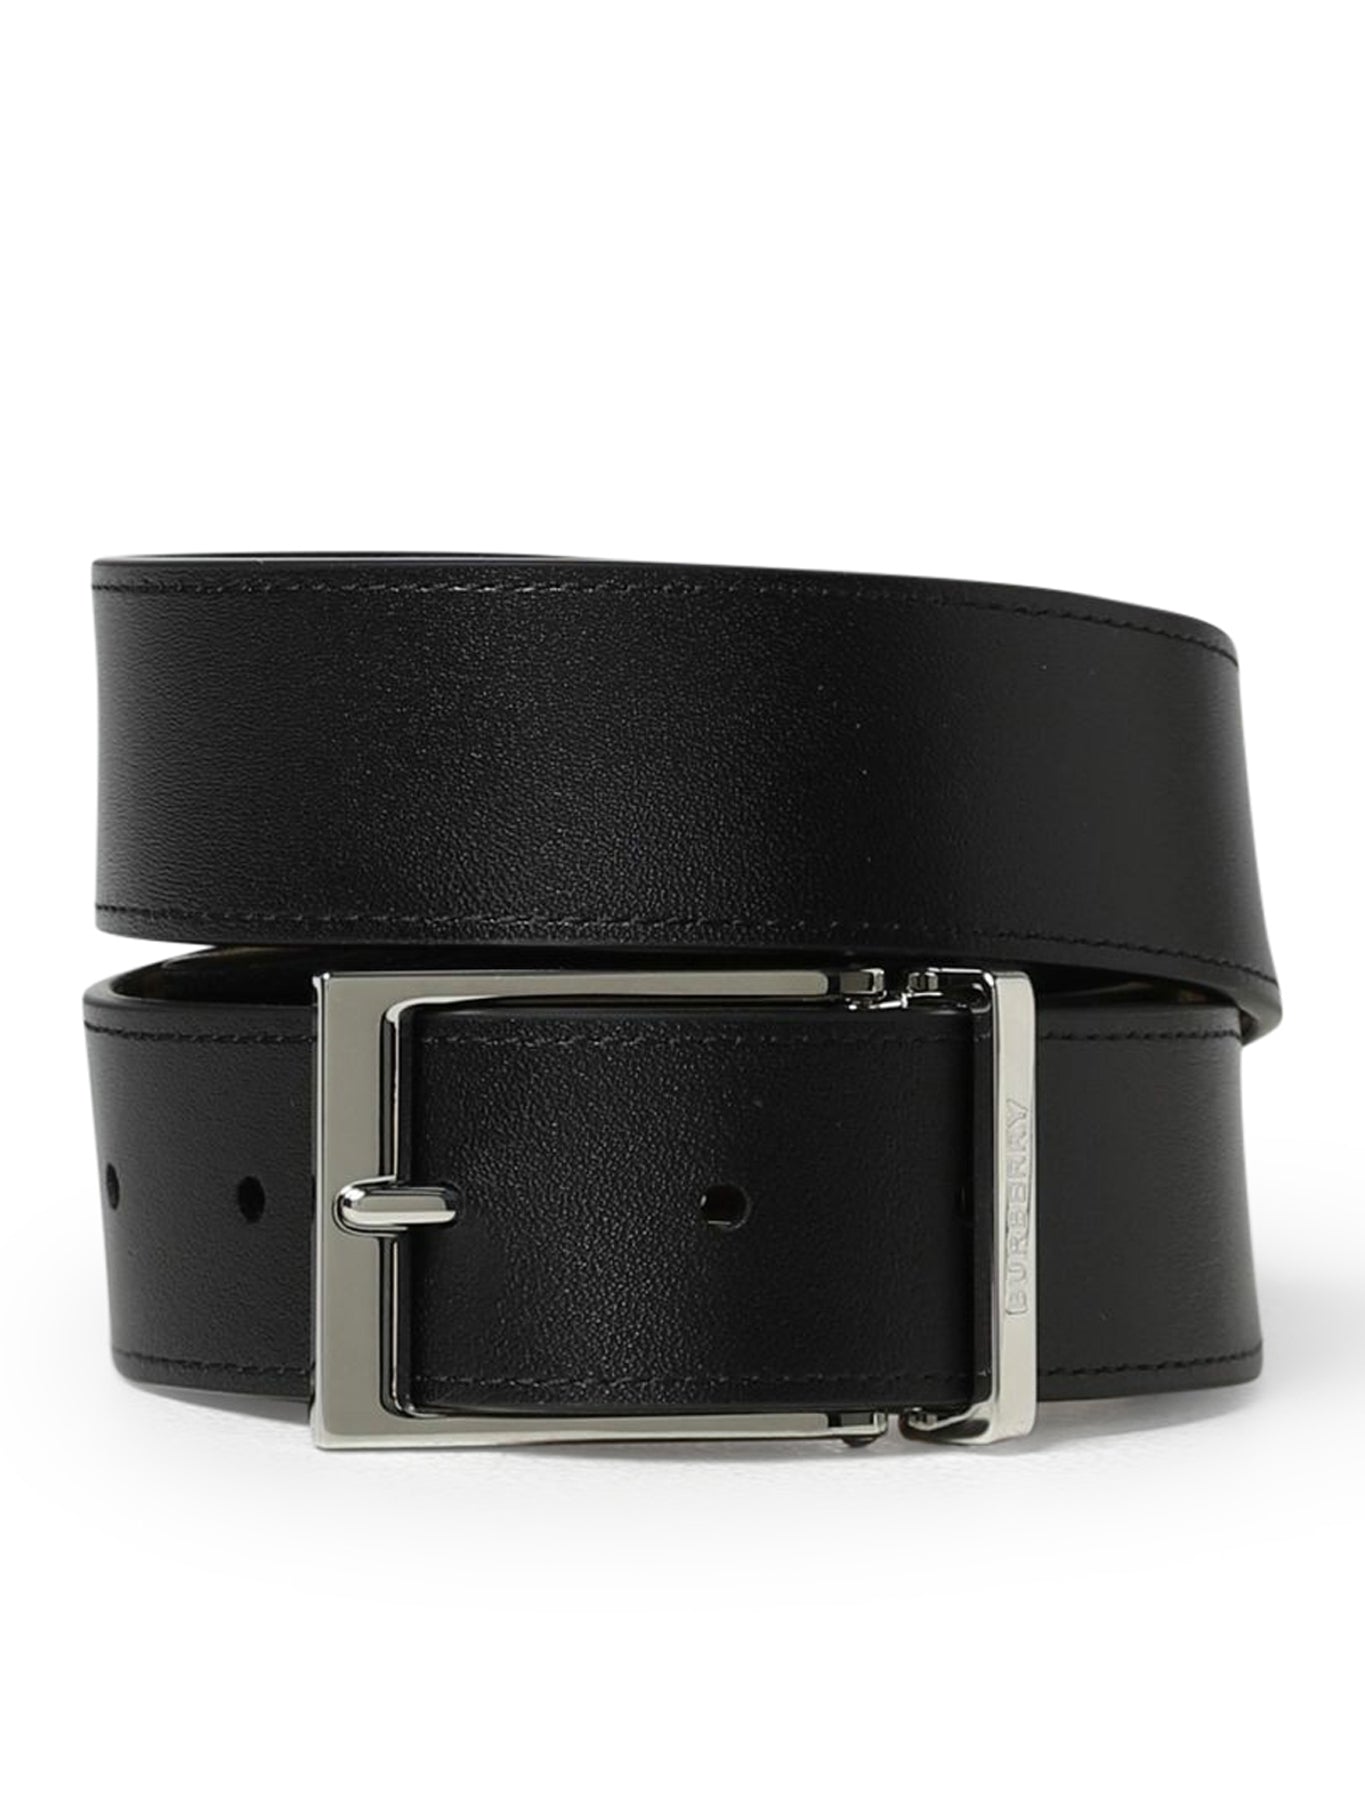 burberry reversible belt in leather and coated fabric